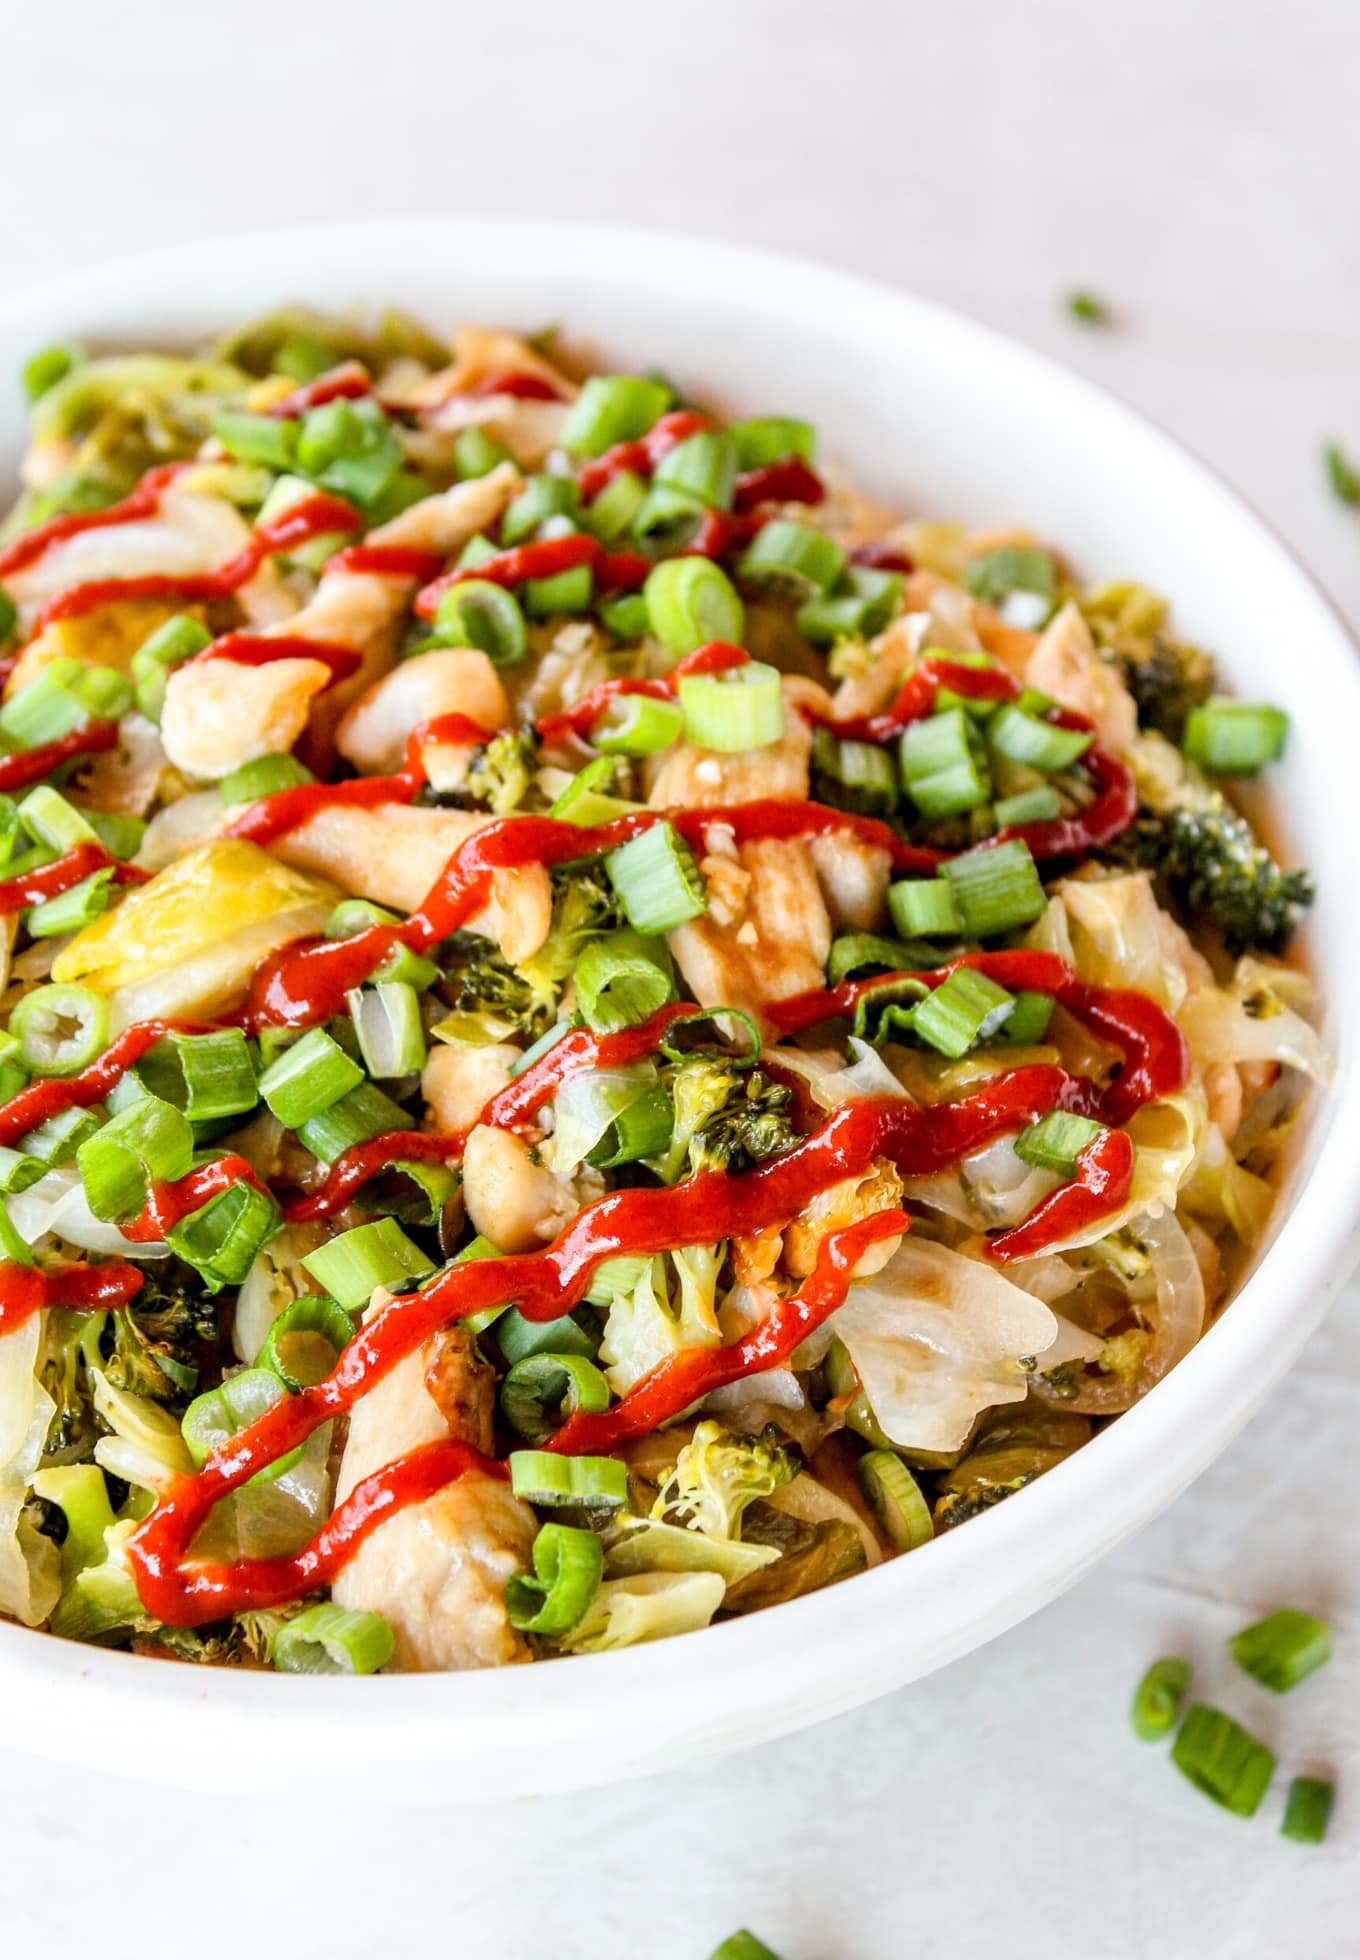 Sheet Pan Chicken & Cabbage Stir Fry - The Whole Cook